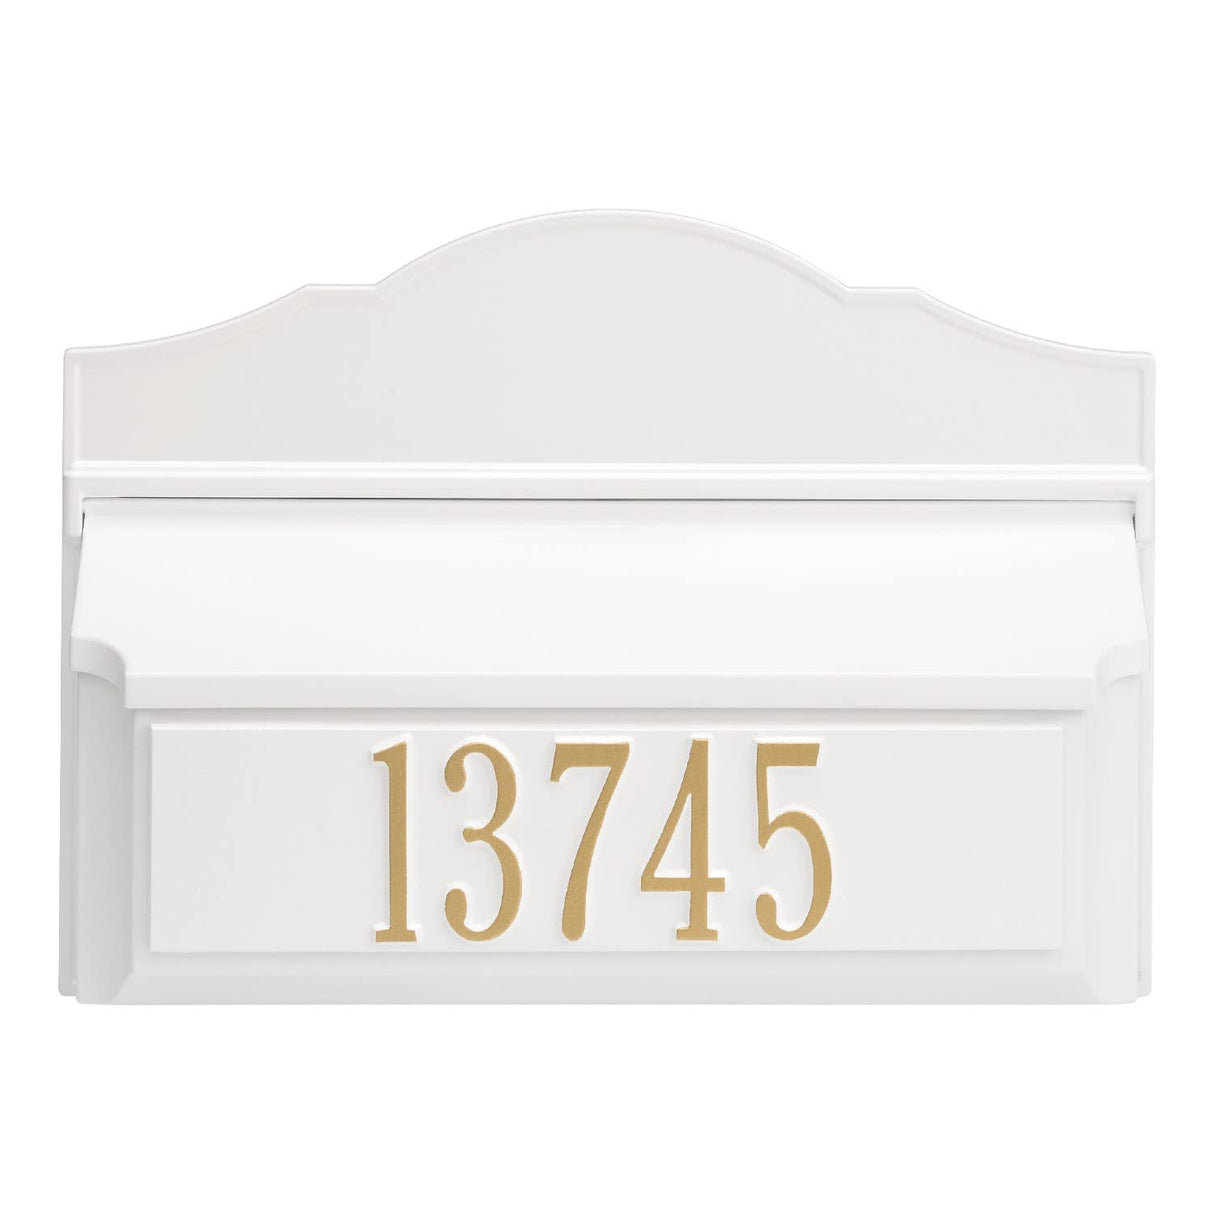 Whitehall 11256 - Colonial Wall Mailbox Package #2 (Mailbox & Plaque)